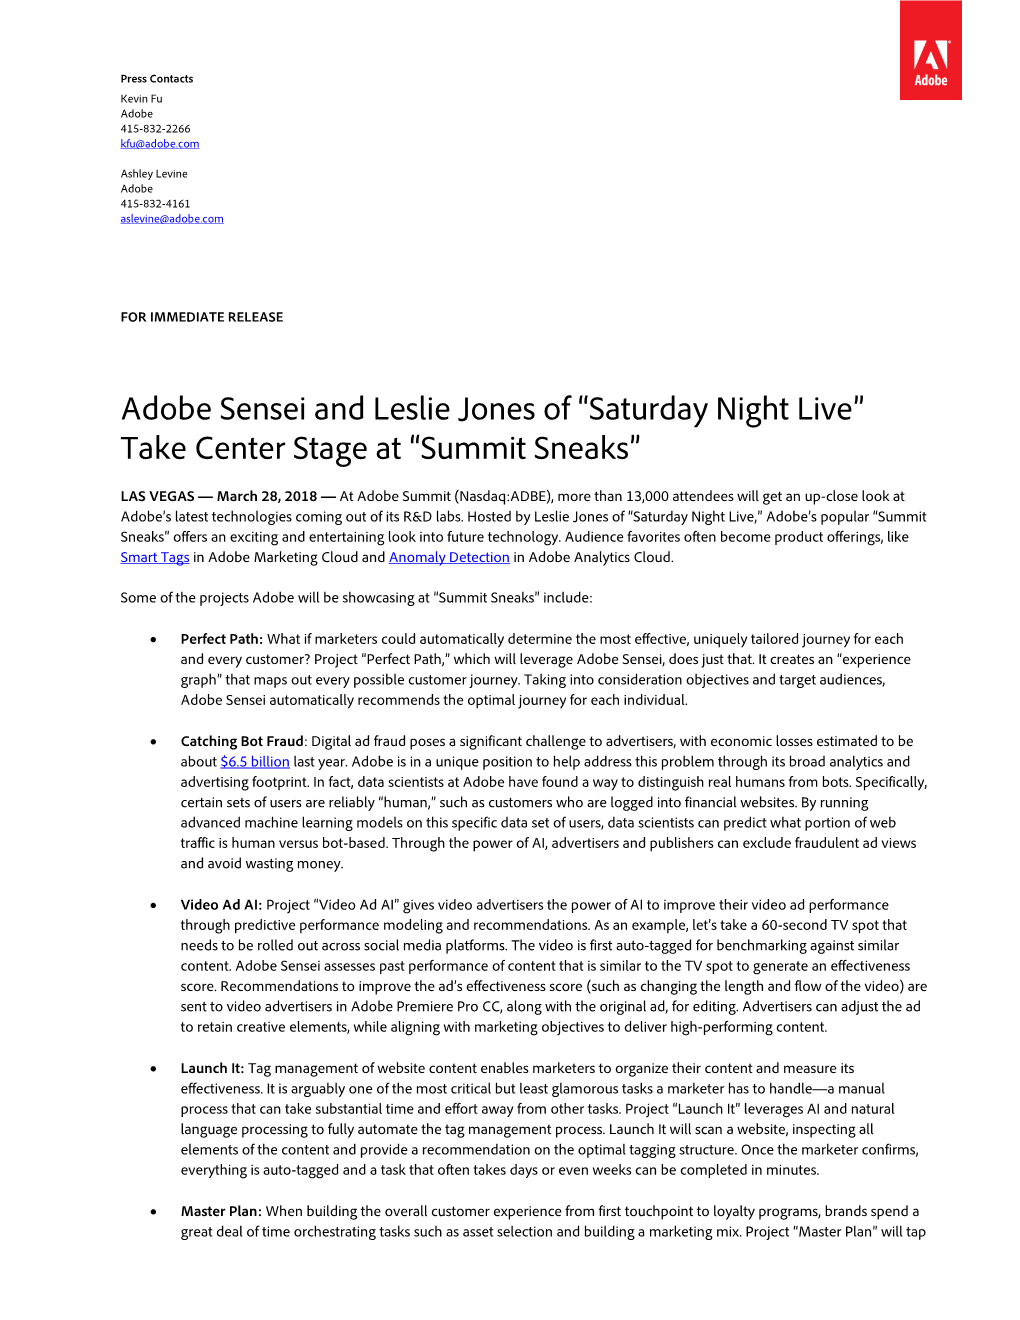 Adobe Sensei and Leslie Jones of “Saturday Night Live” Take Center Stage at “Summit Sneaks”